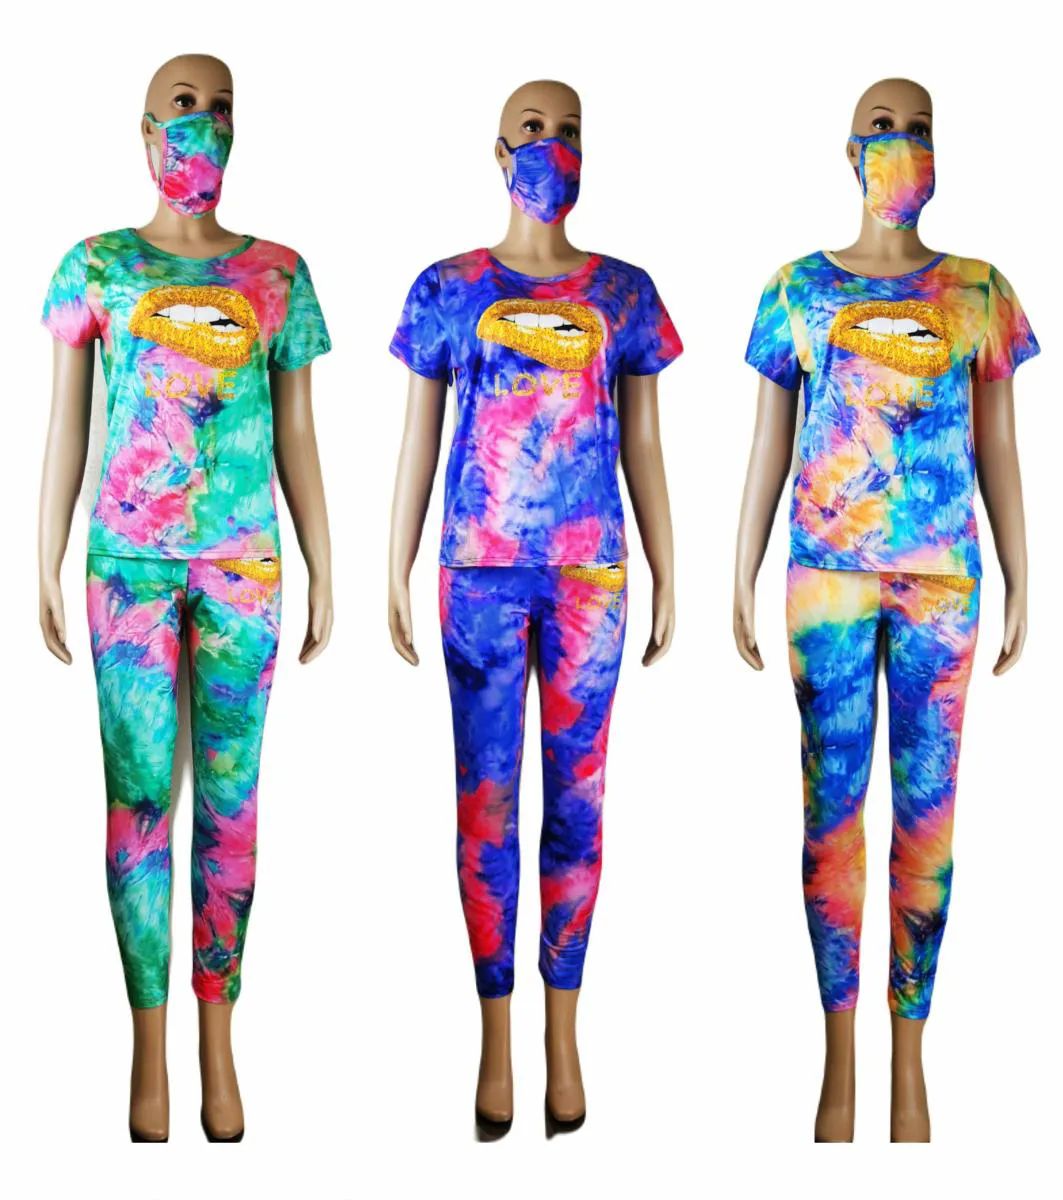 60 Pieces of Women's Tie Dye Short Sleeve Set With Mask